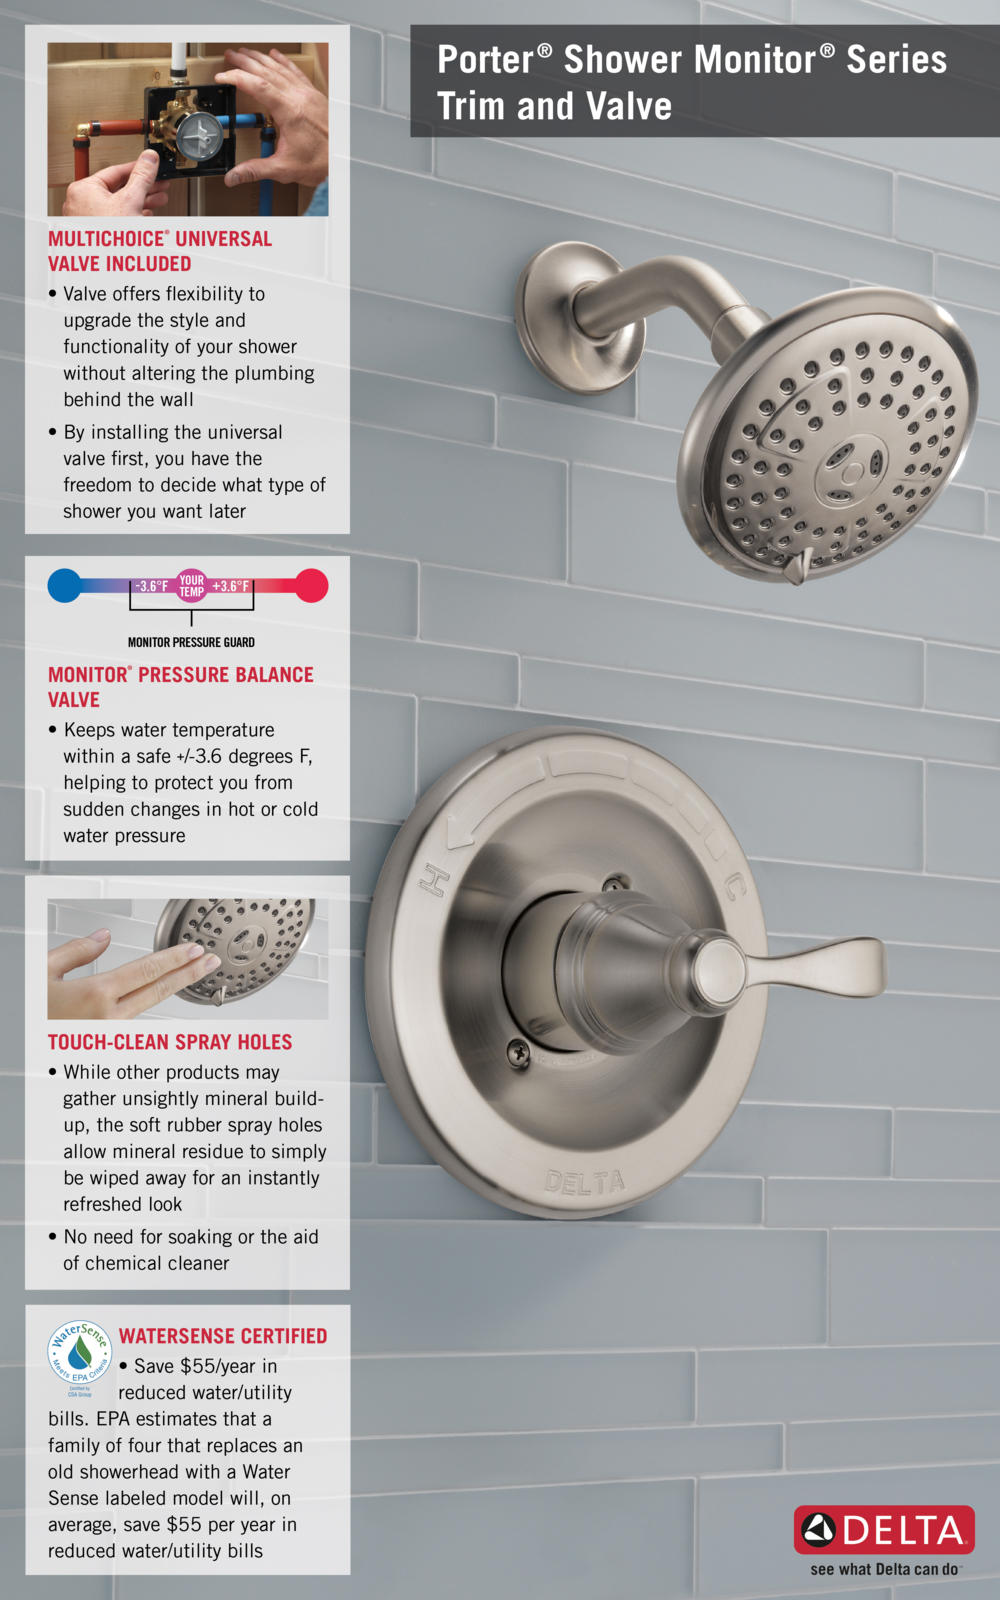 Home Depot Faucet 142984-BN-A T14 Shower with Valve Infographic